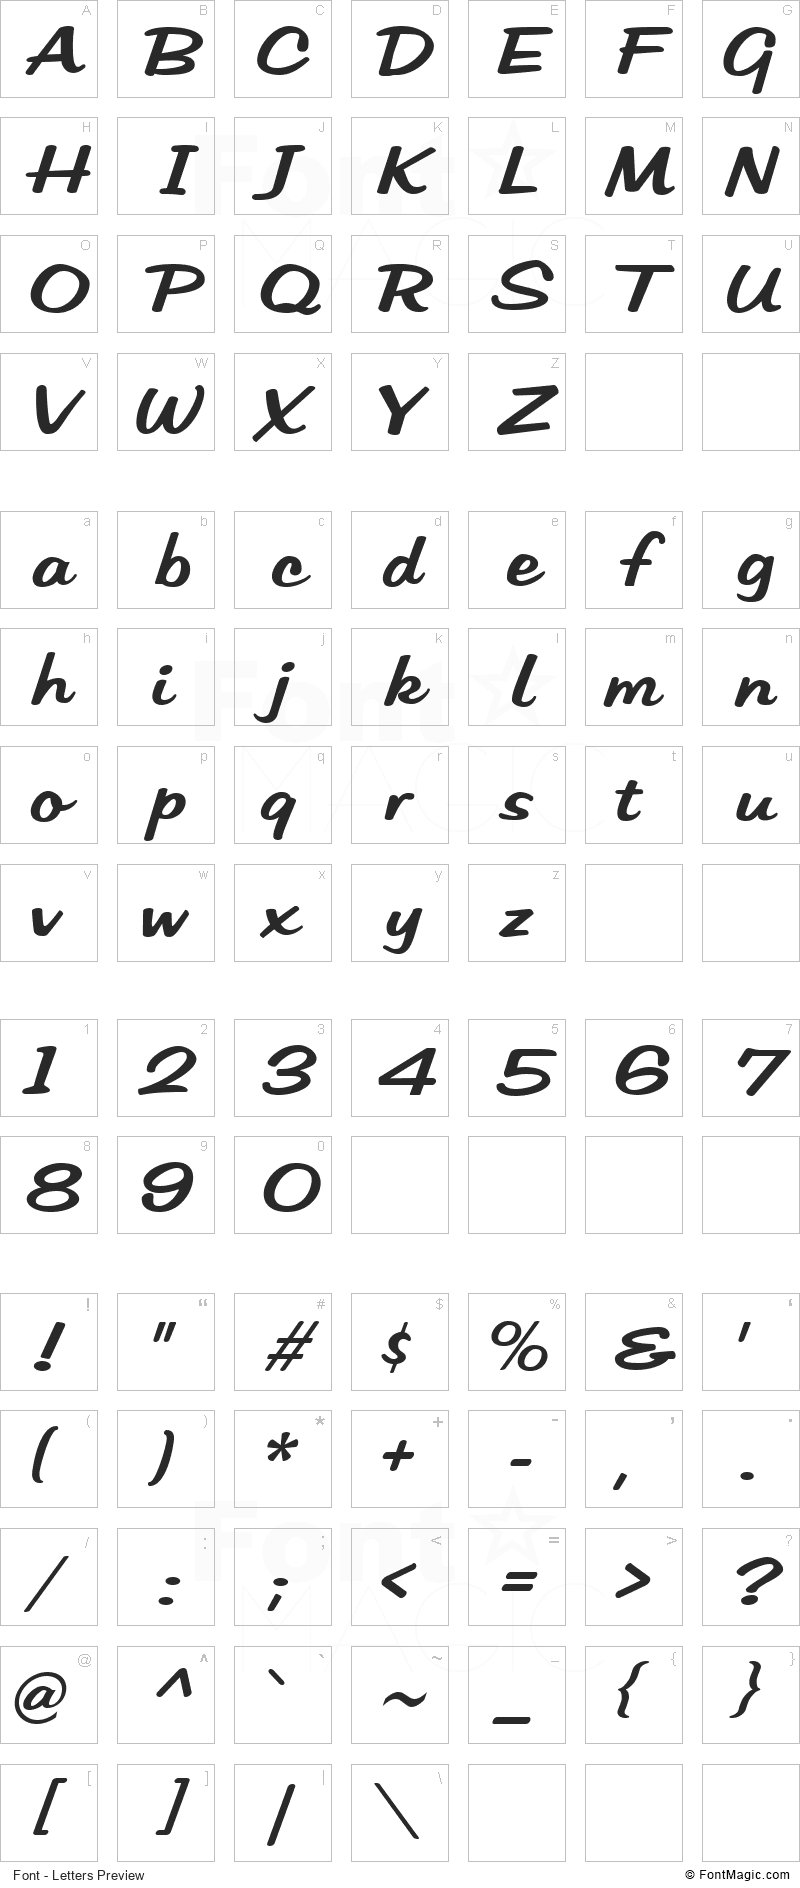 HFF Low Sun Font - All Latters Preview Chart